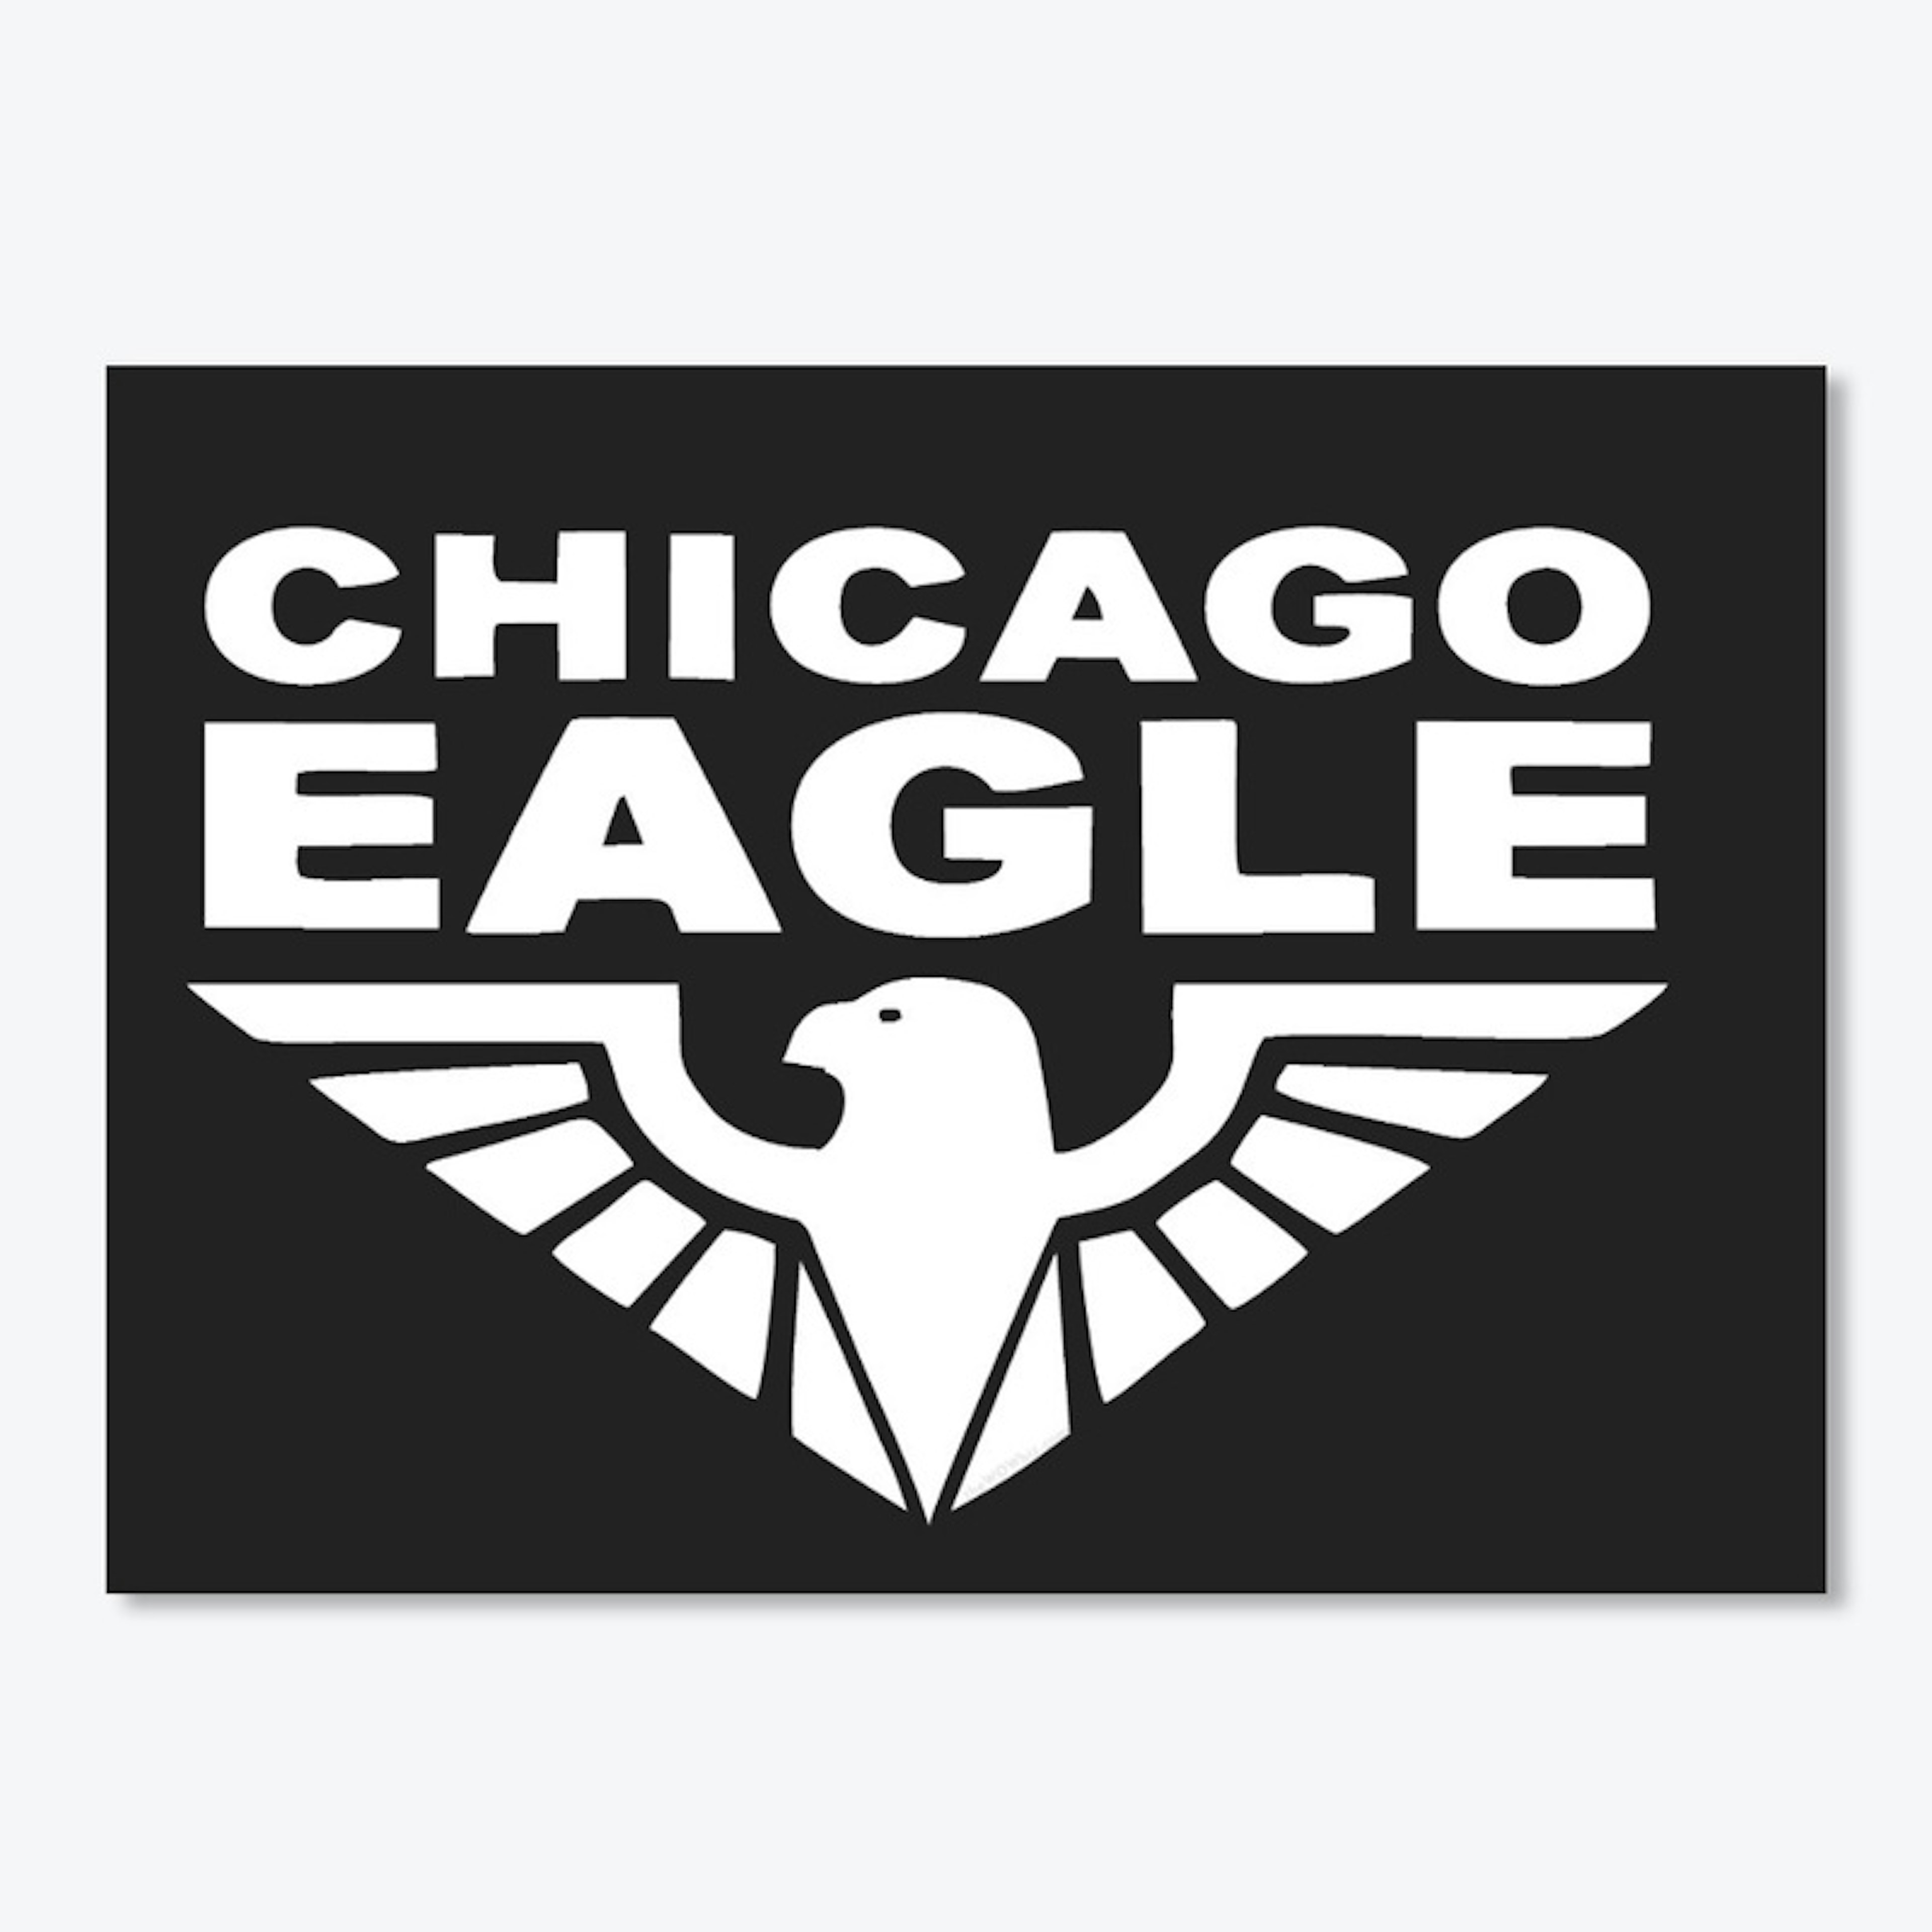 ChicagoEagle